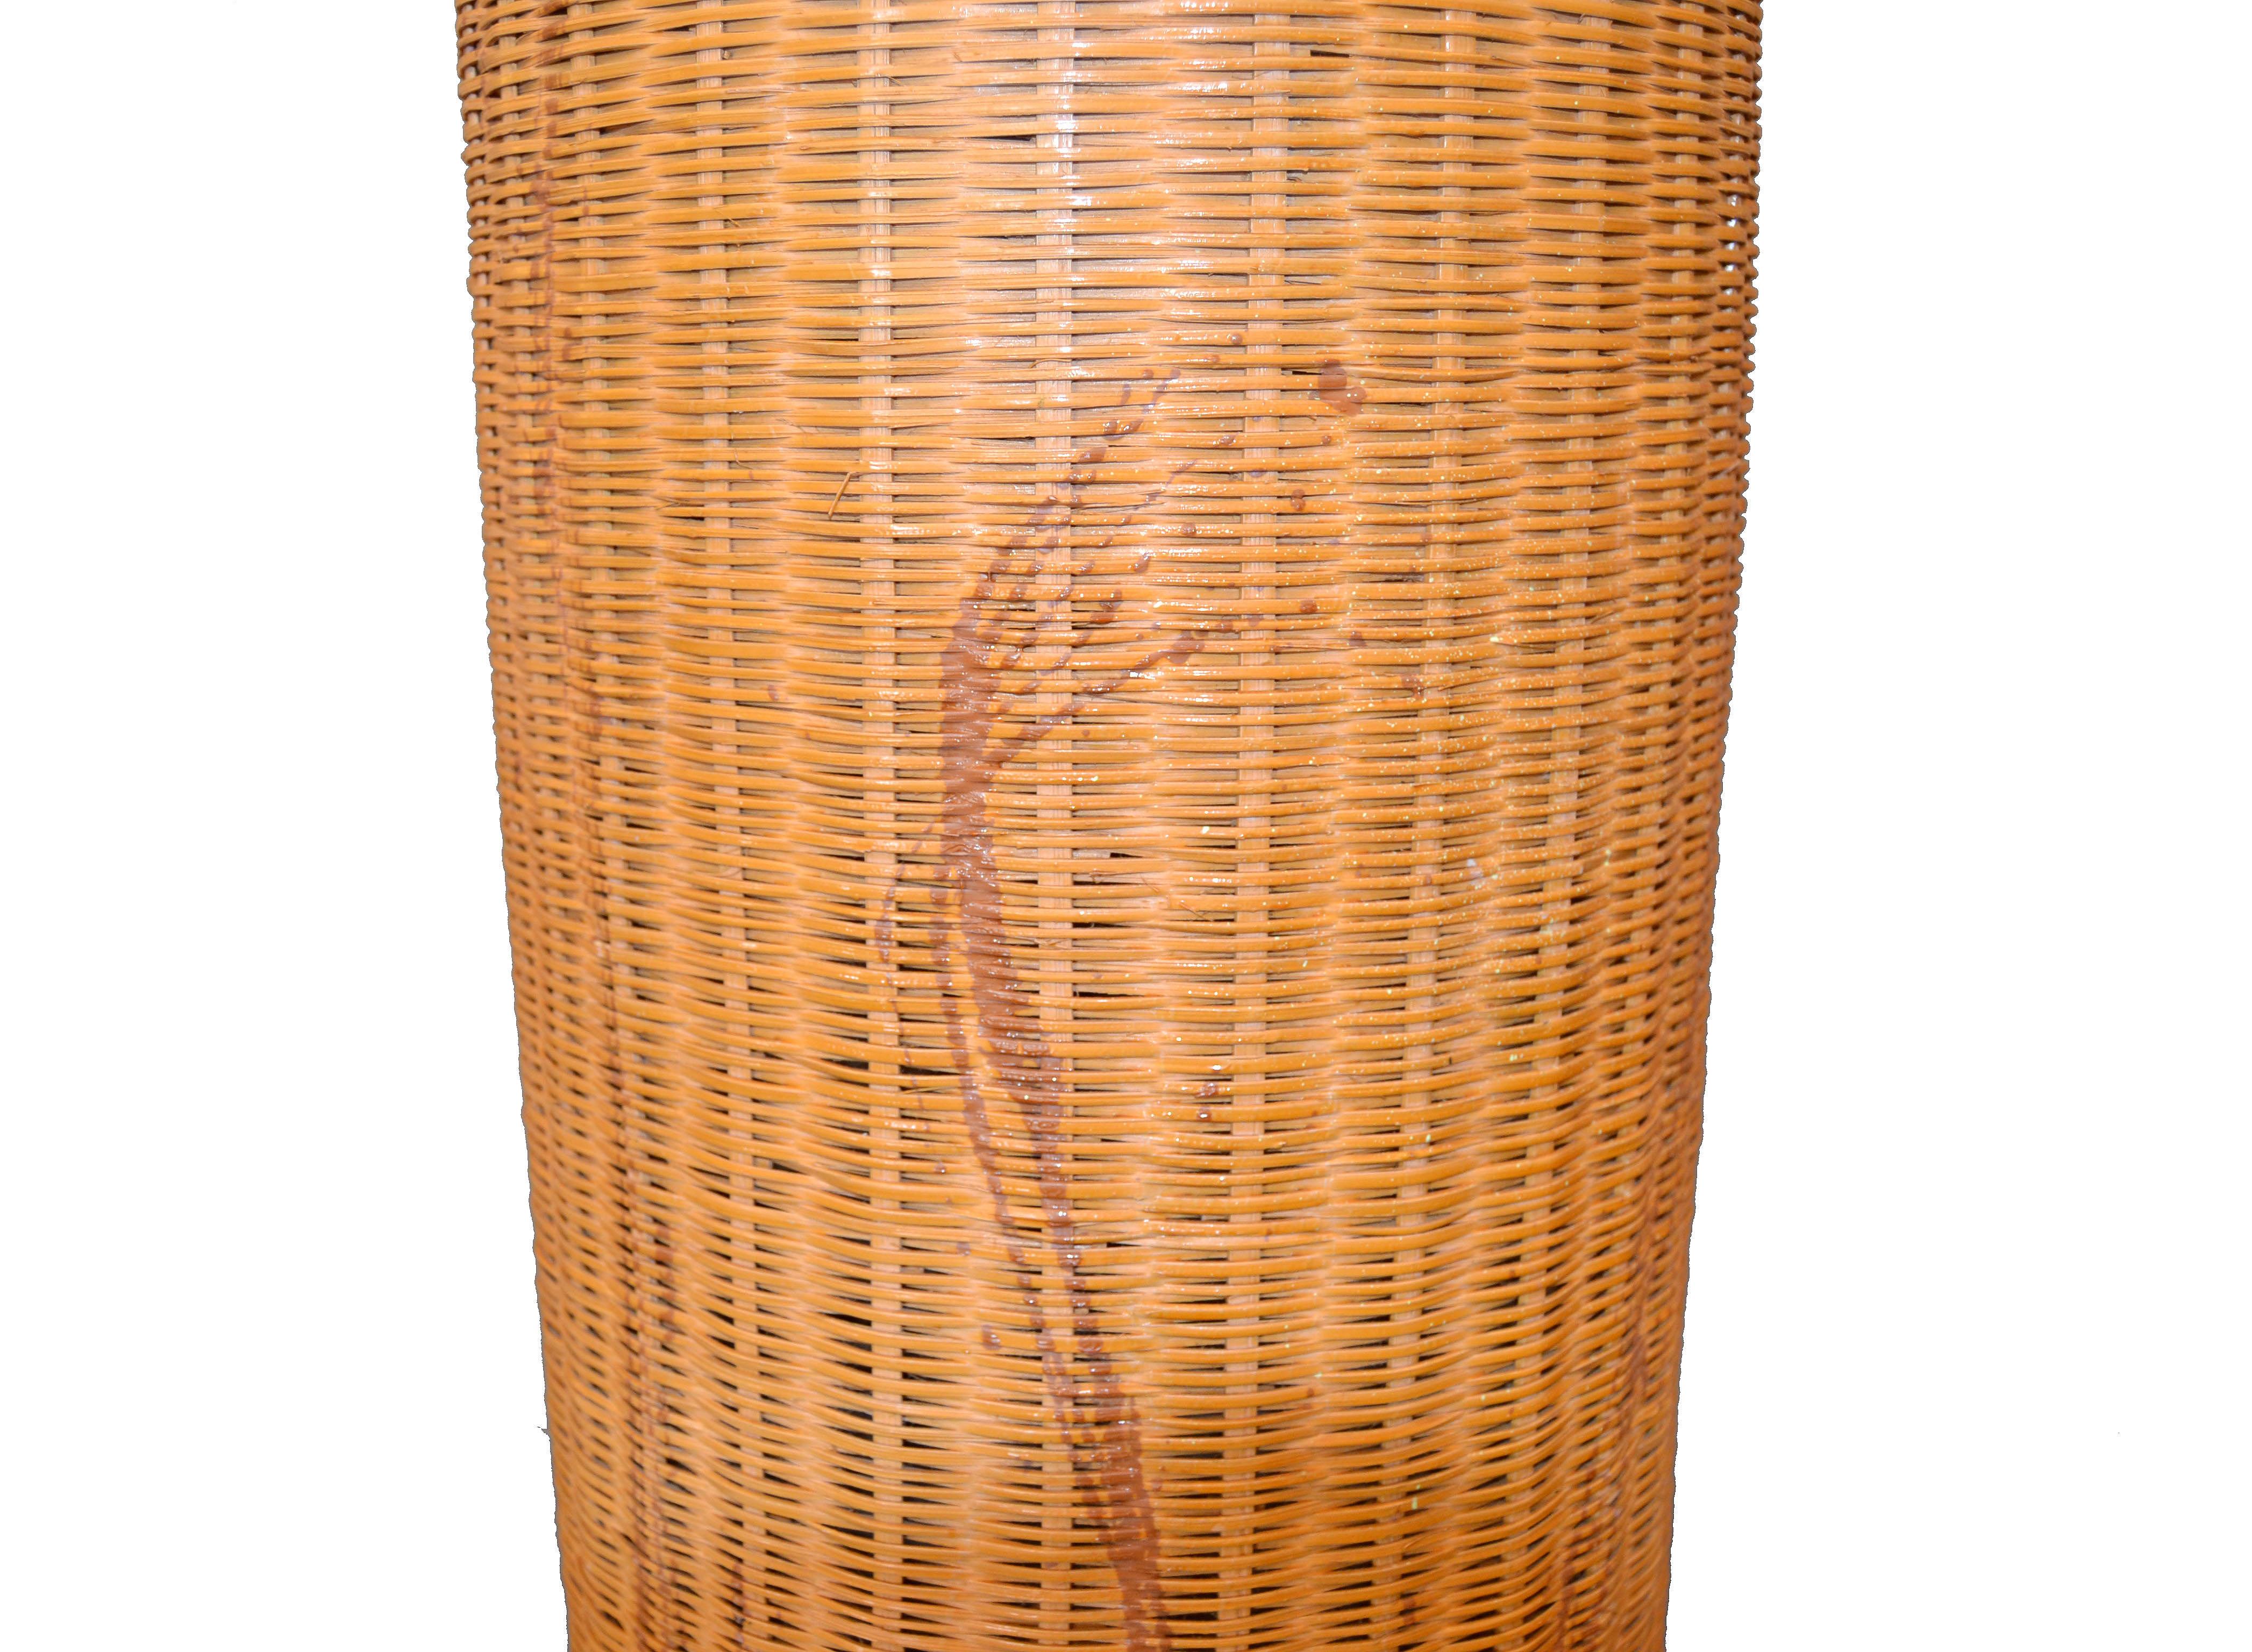 Huge Boho Chic Mid-Century Modern Handwoven Wicker Rattan Cone Shade In Good Condition For Sale In Miami, FL